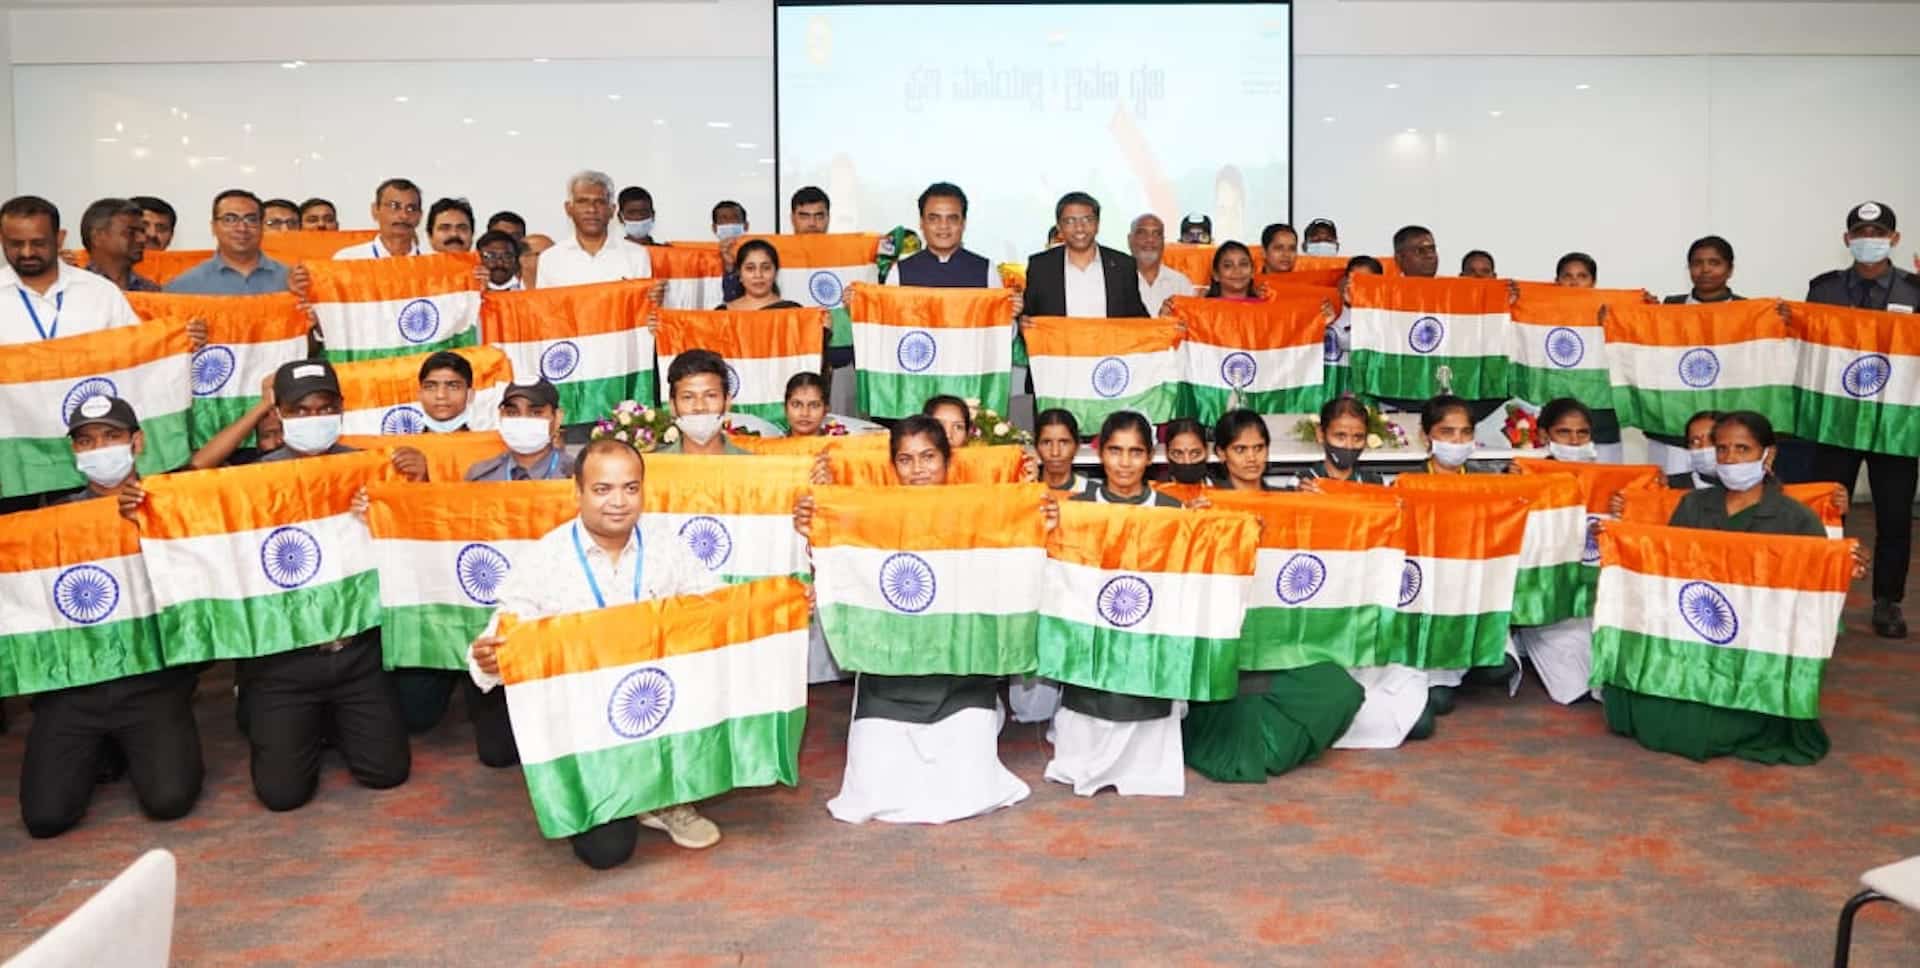 Karnataka Minister launches ‘Har Ghar Tiranga’ with tech firms, recognises their contribution